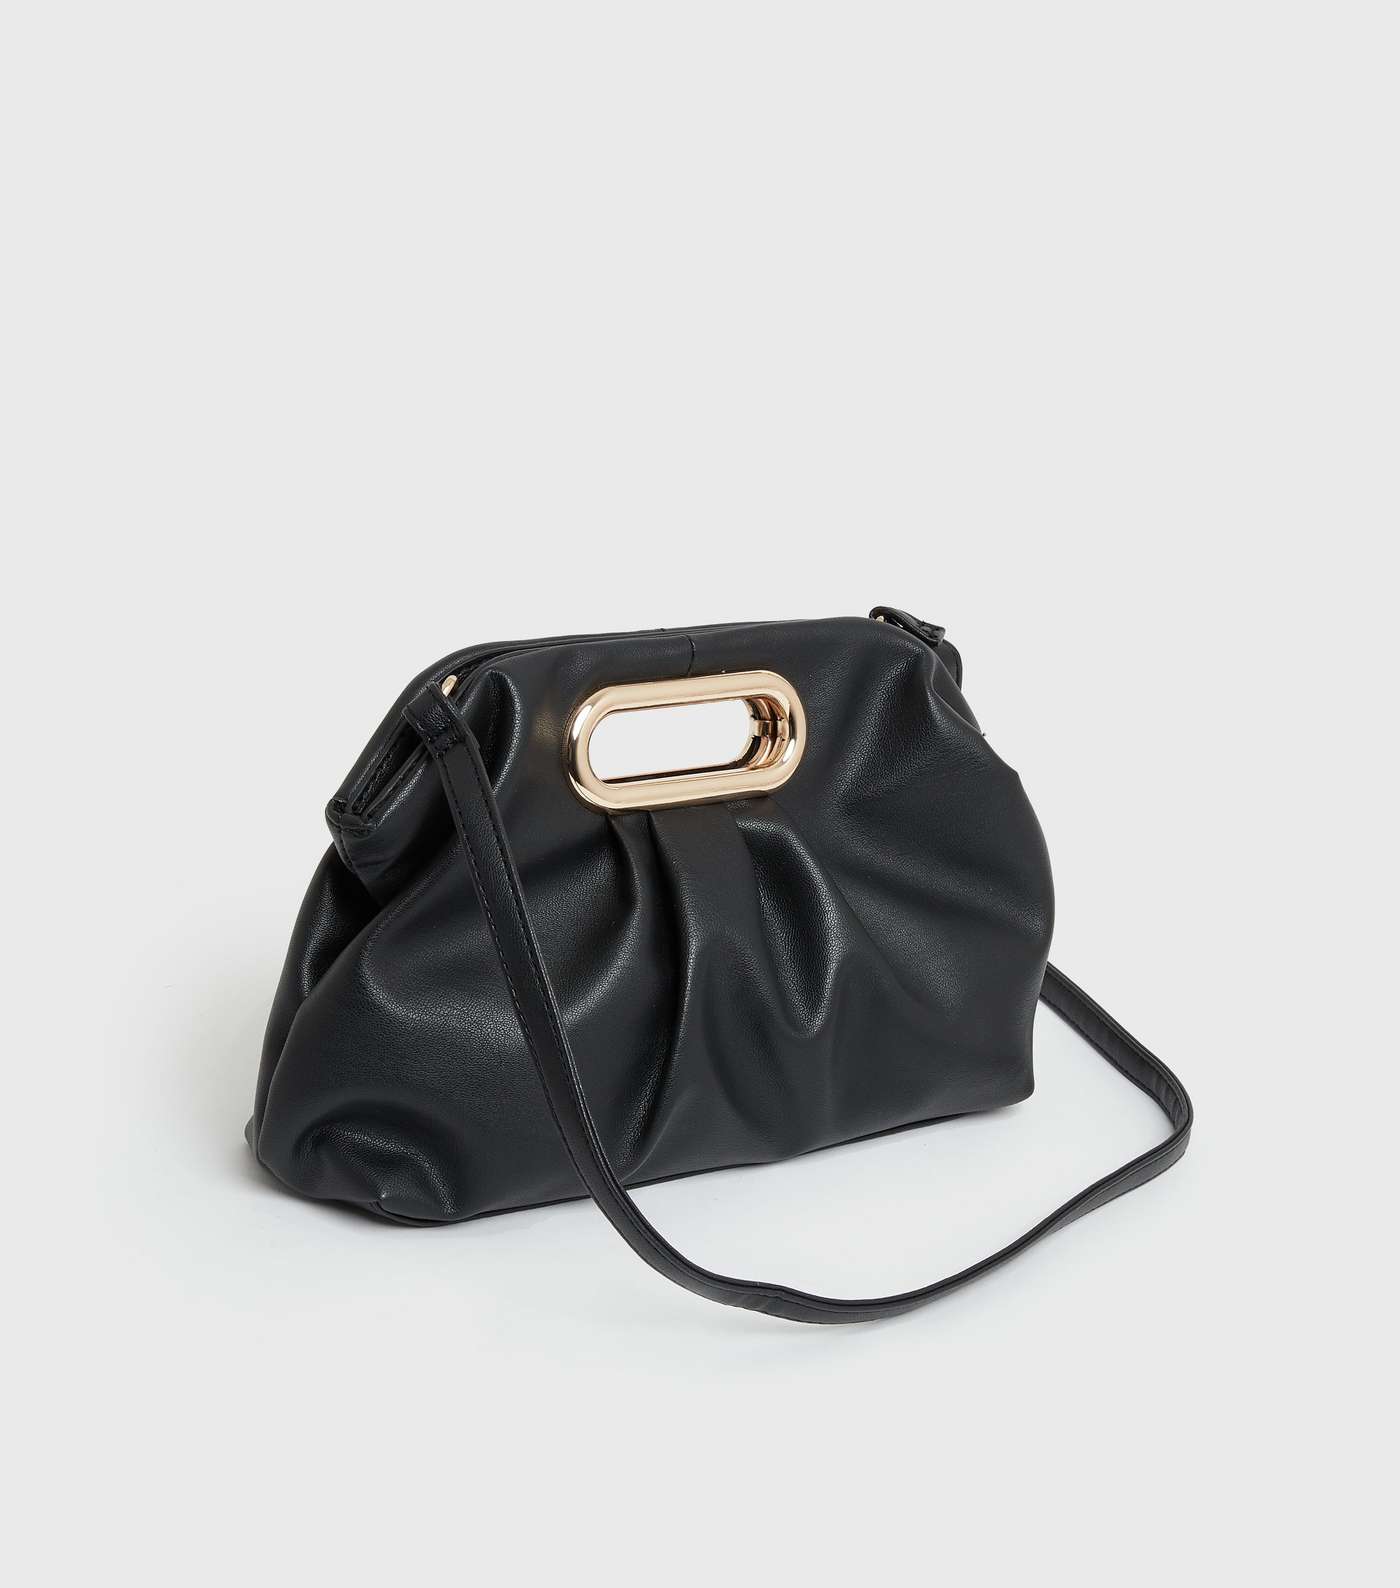 Black Leather-Look Ruched Clutch Bag Image 3